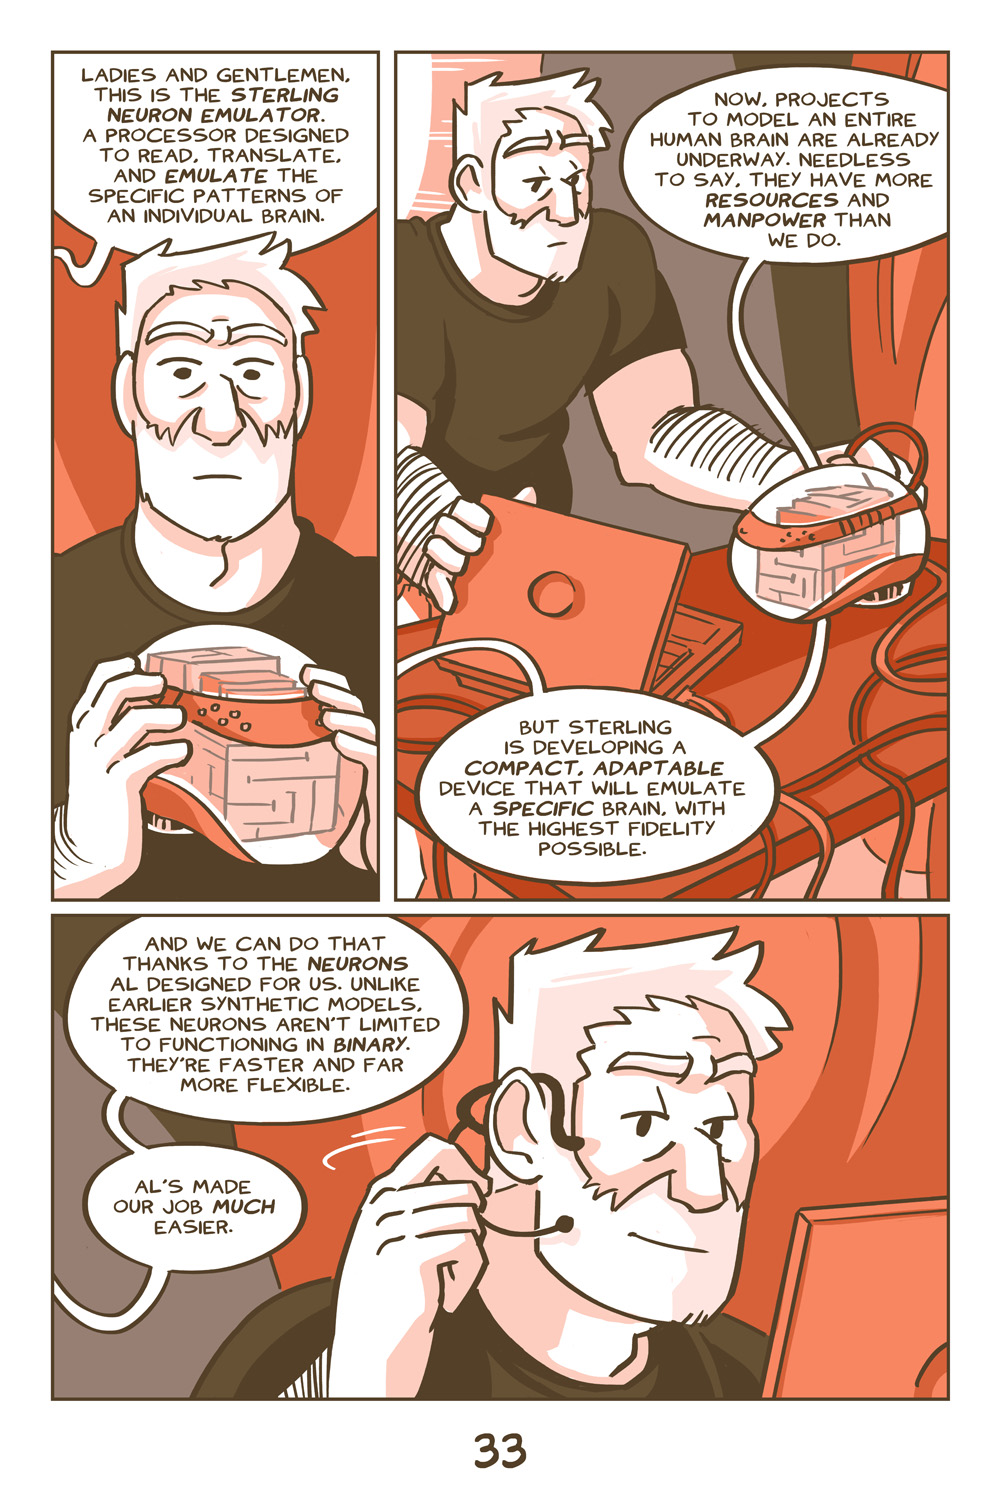 Chapter 3, Page 33